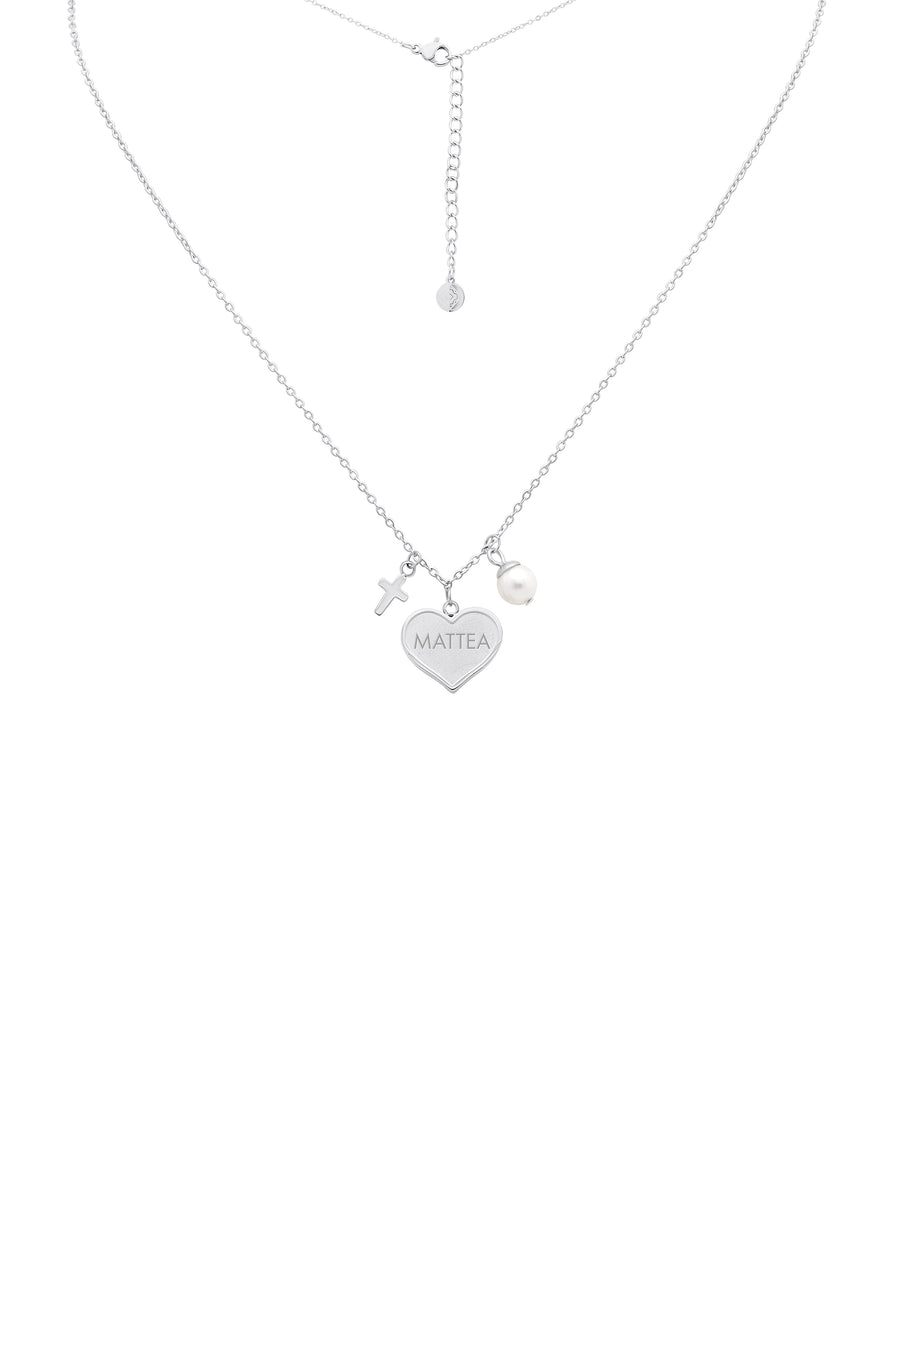 Engravable Silver Heart Charm Necklace